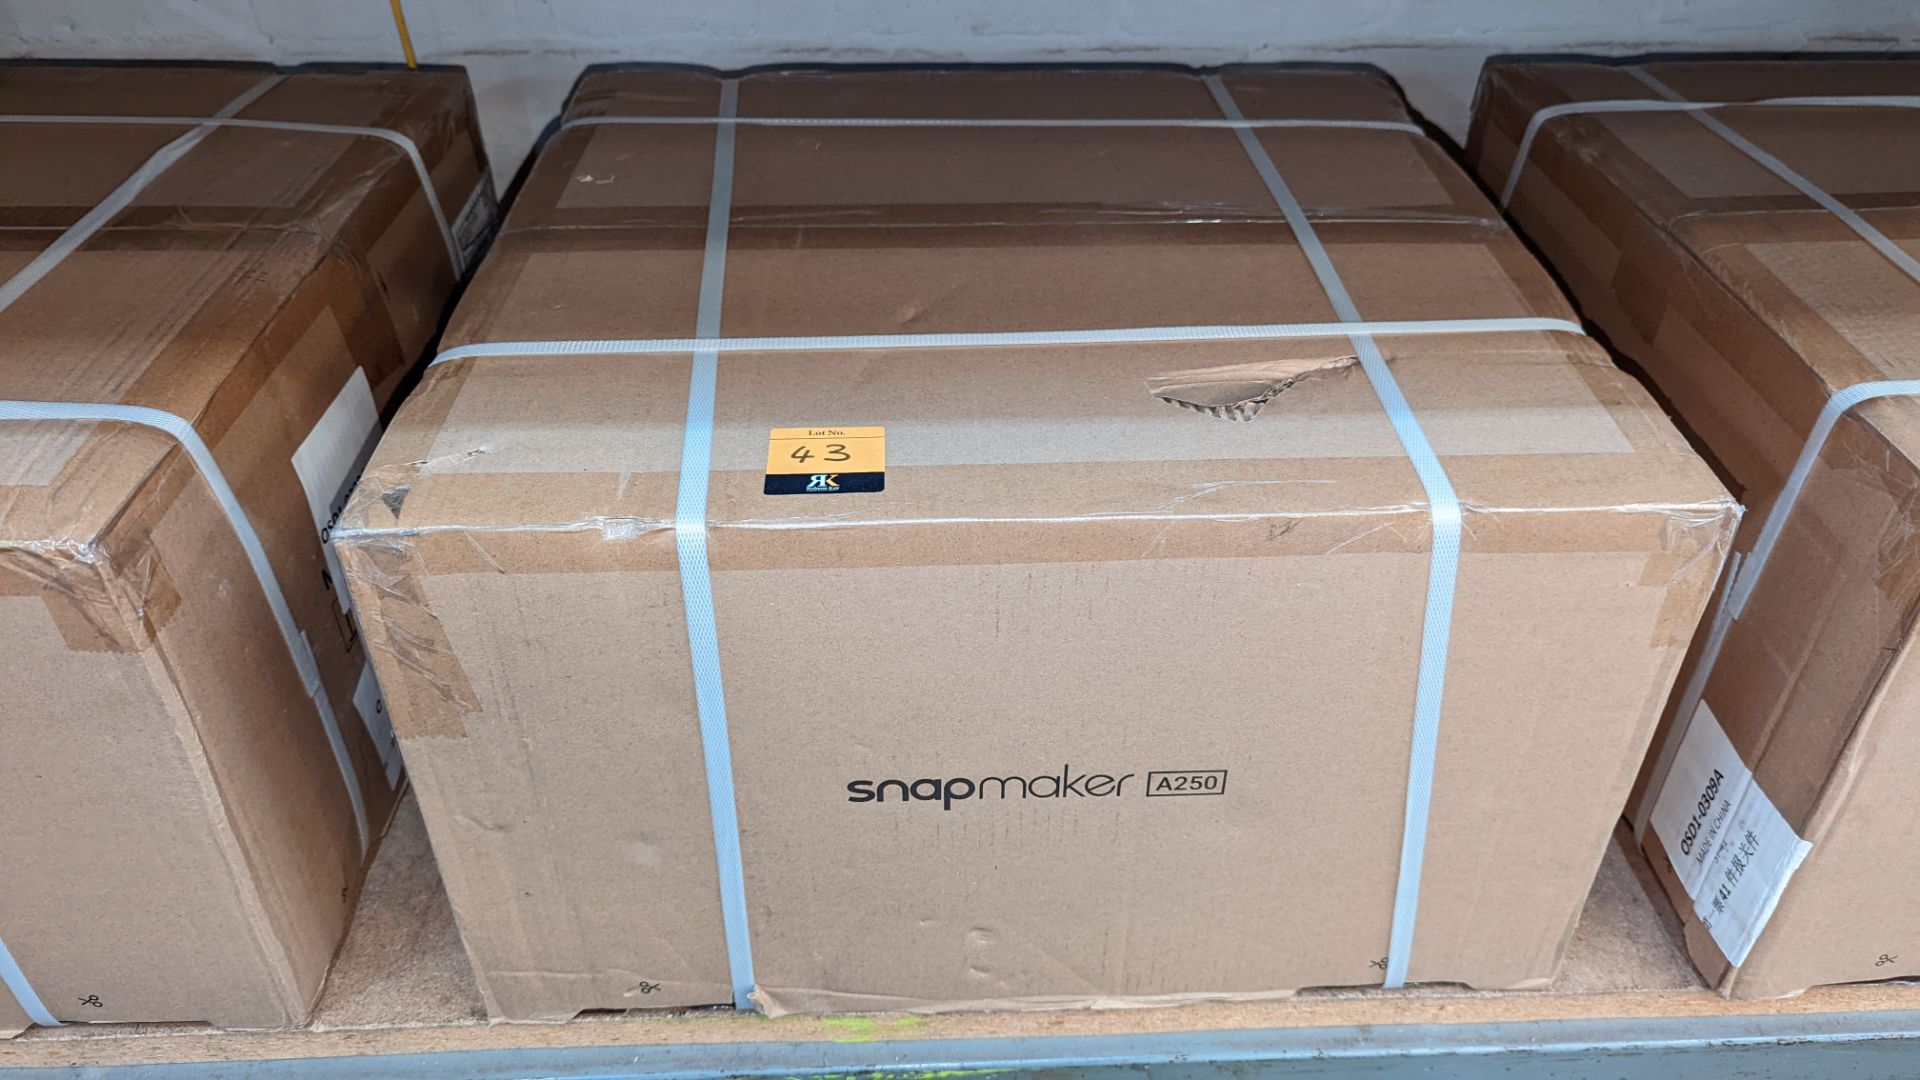 Snapmaker model A250 3D printer - boxed, delivered with original banding, assumed to be new/unused - Image 3 of 4